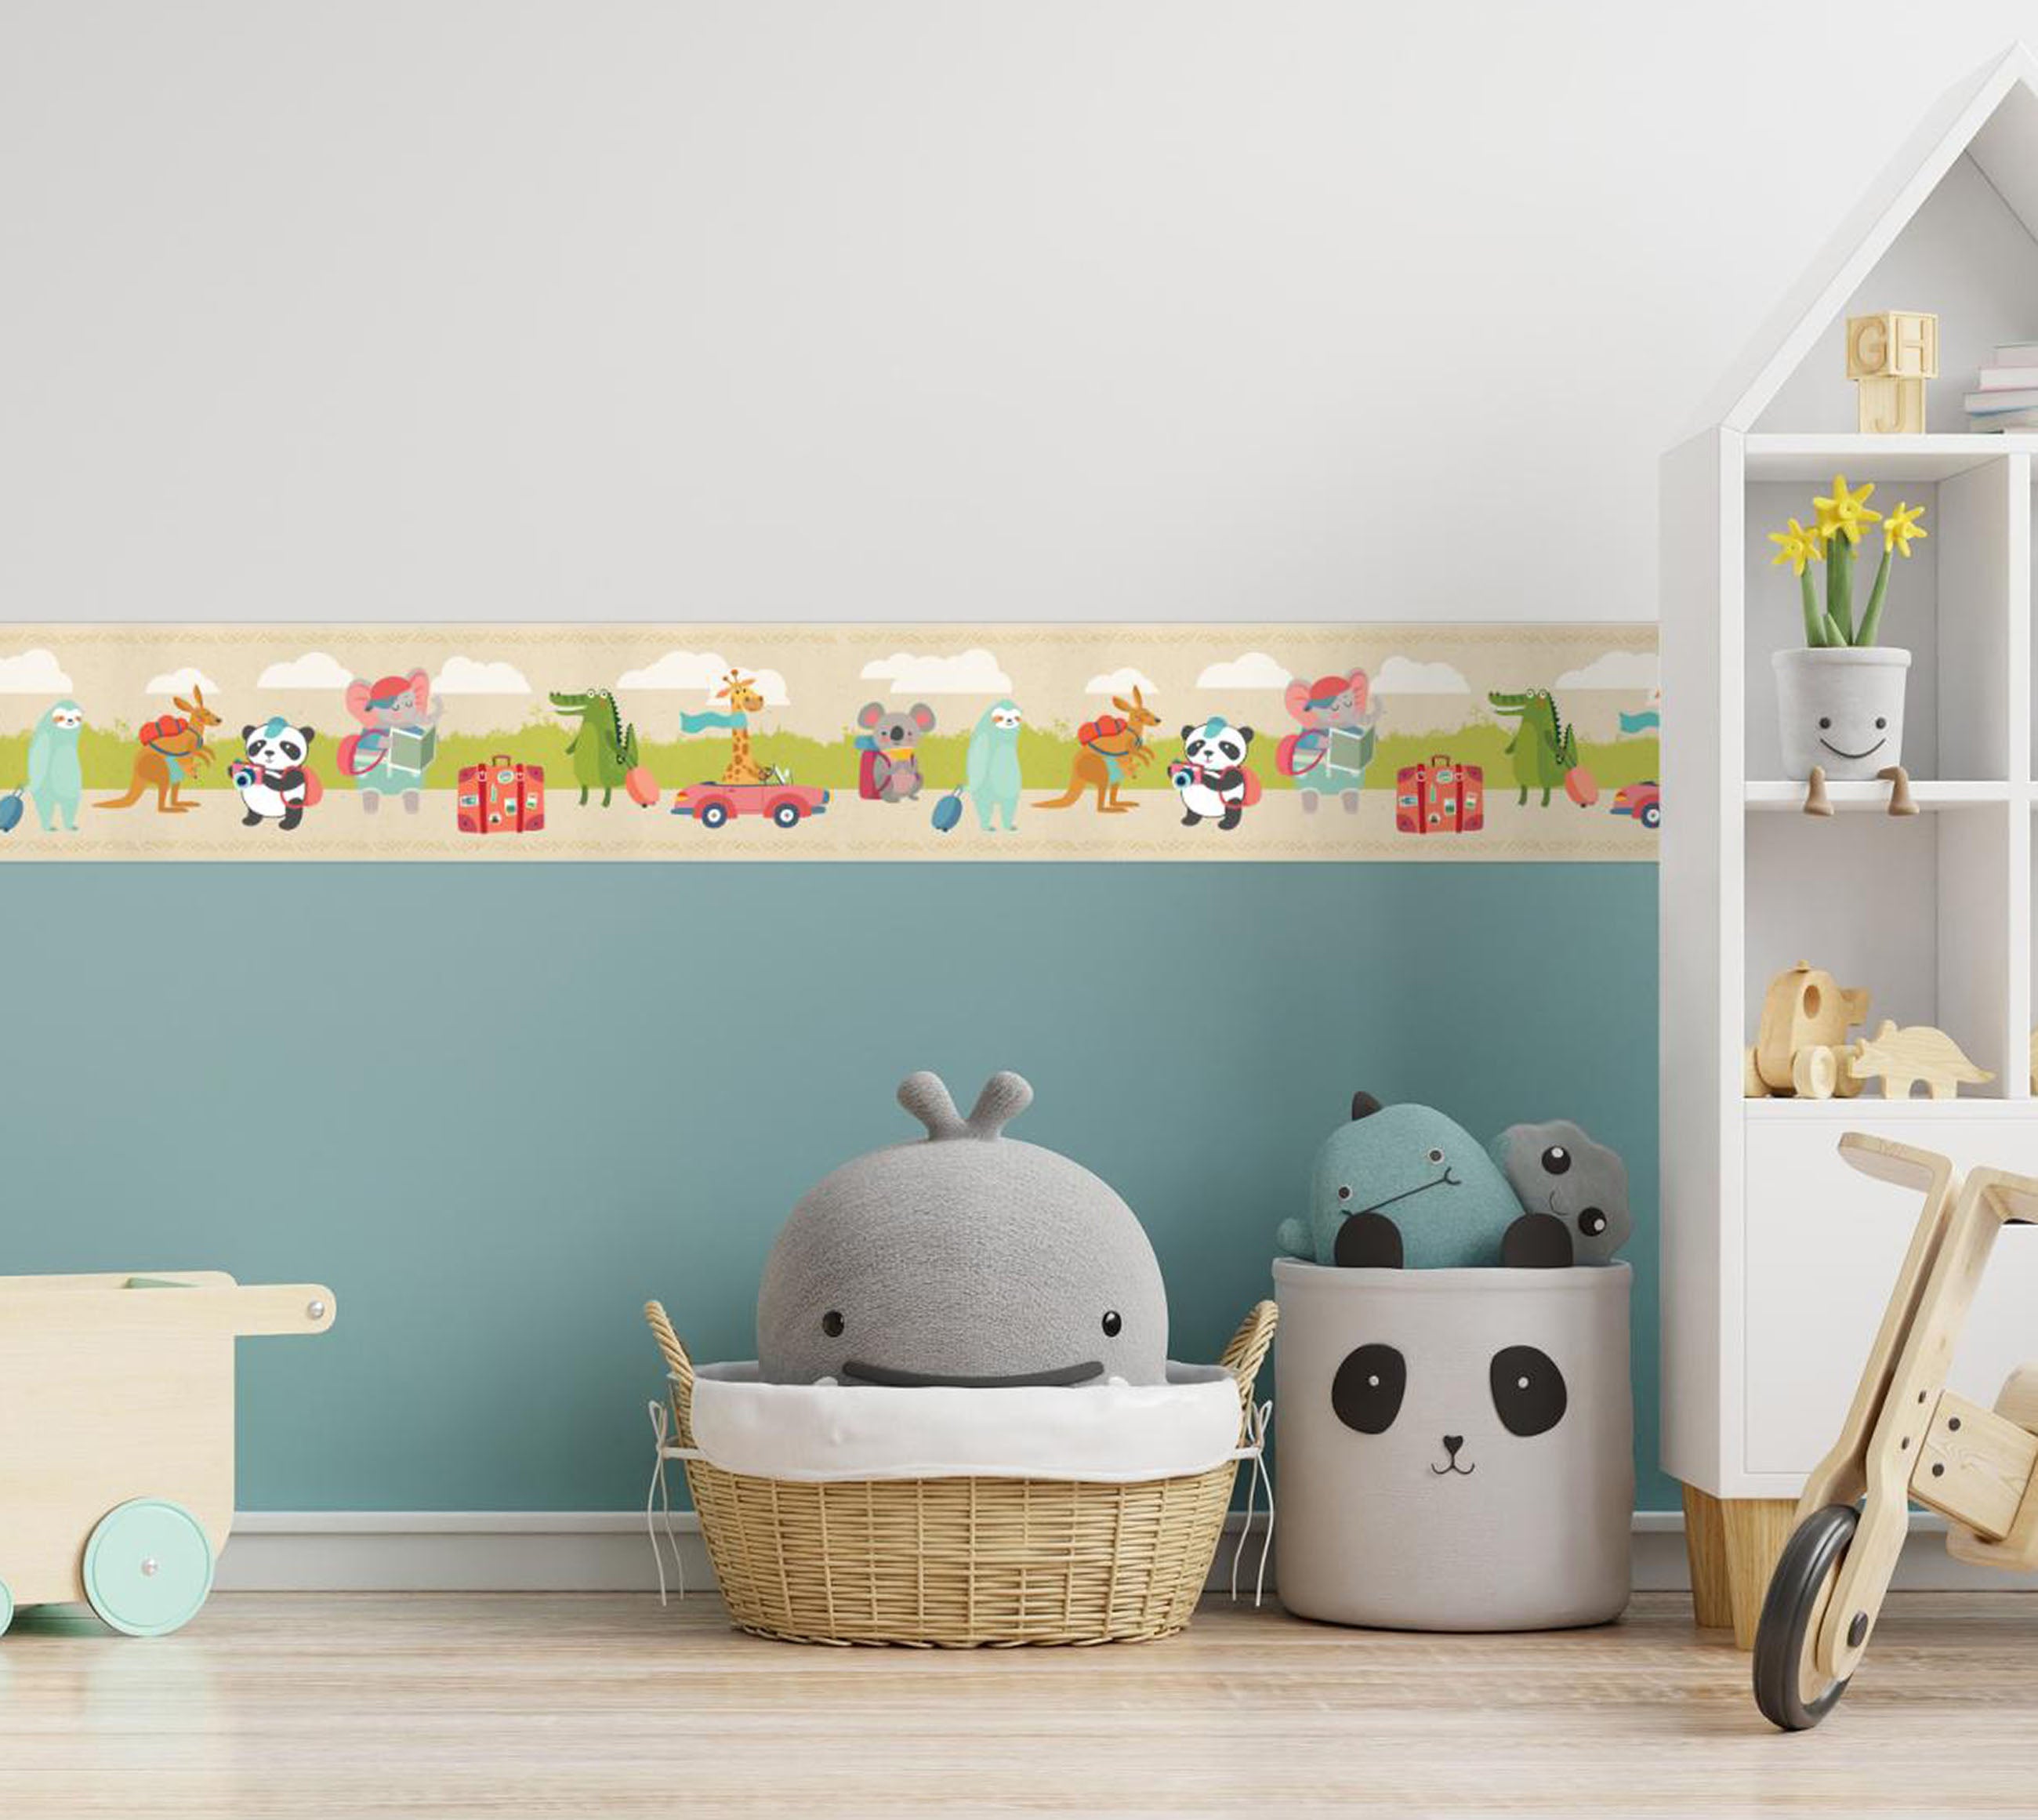 Children's wallpaper boarder with cute animals traveling in blue, green, gray and brown. Wallpaper border is in a kids room setting.